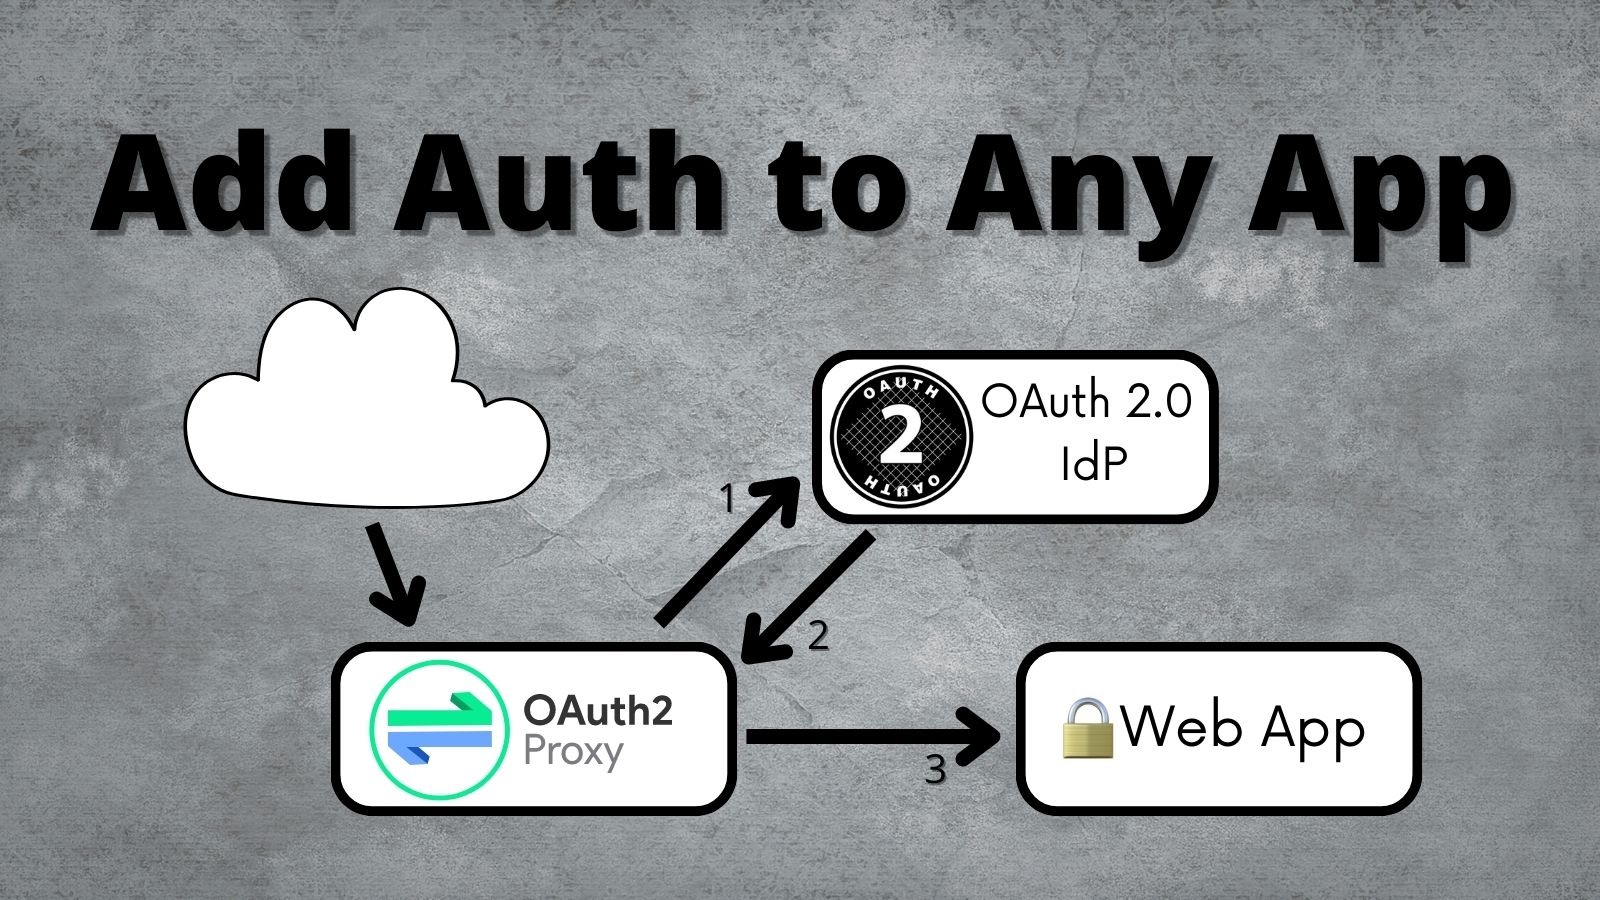 Add Auth to Any App with OAuth2 Proxy